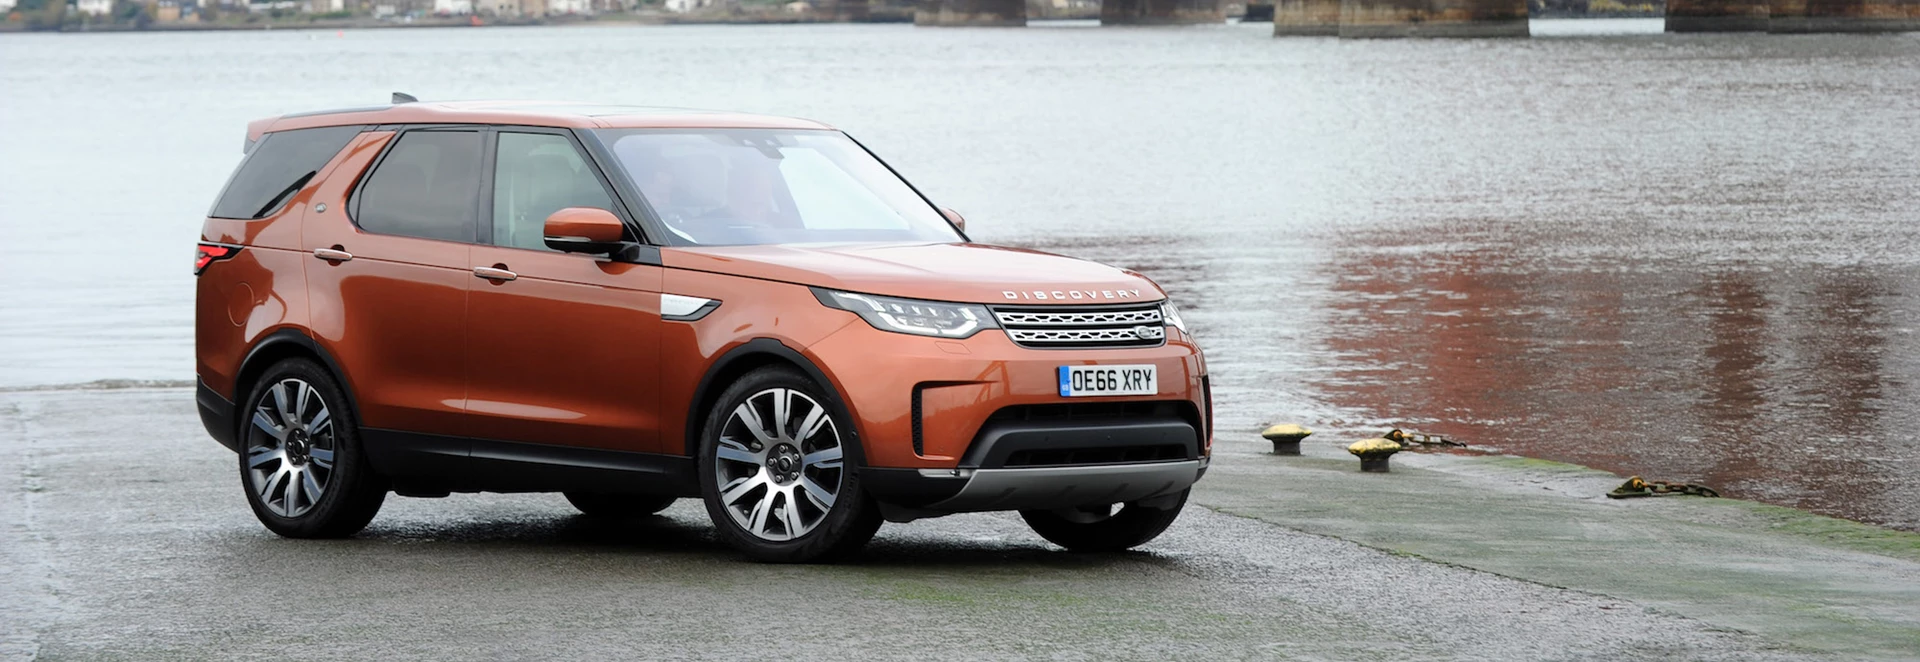 Land Rover Discovery wins Scottish Car of the Year 